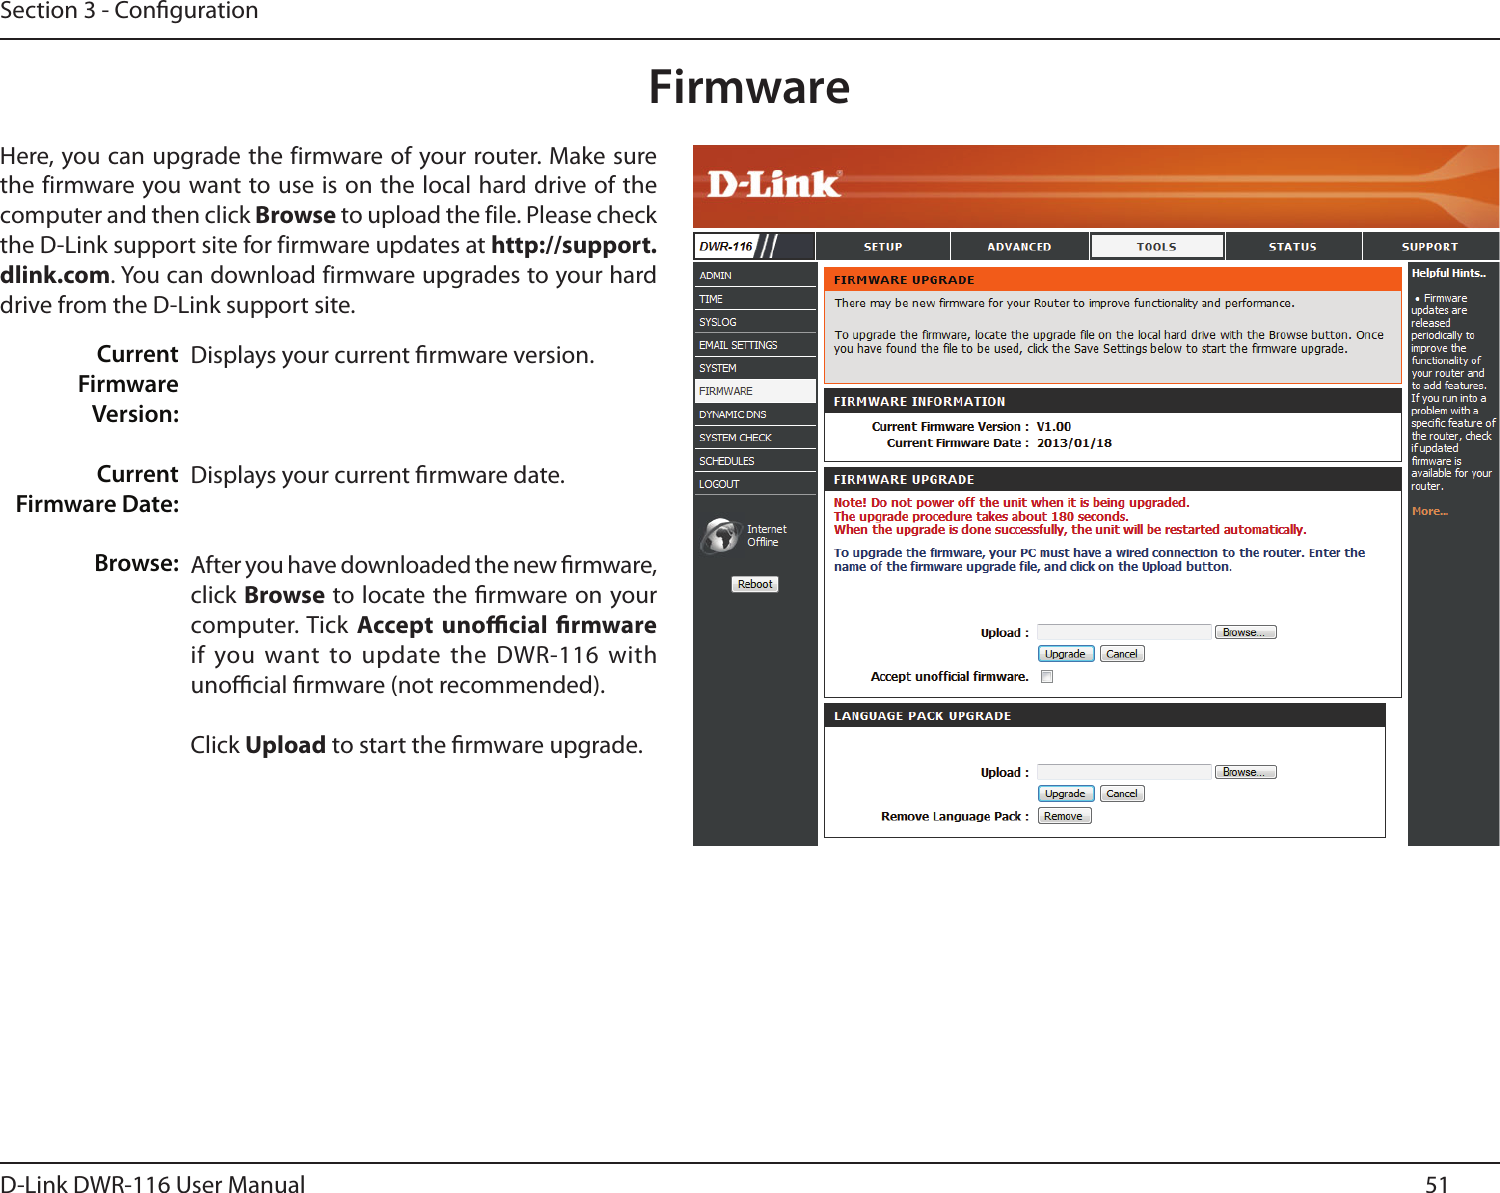 51D-Link DWR-116 User ManualSection 3 - CongurationFirmwareDisplays your current rmware version.Displays your current rmware date.After you have downloaded the new rmware, click Browse to locate the rmware on your computer. Tick Accept  unocial  rmware if you want to update the  DWR-116 with unocial rmware (not recommended).Click Upload to start the rmware upgrade.Here, you can upgrade the firmware of your router. Make sure the firmware you want to use is on the local hard drive of the computer and then click Browse to upload the file. Please check the D-Link support site for firmware updates at http://support.dlink.com. You can download firmware upgrades to your hard drive from the D-Link support site.Current Firmware Version:Current  Firmware Date:Browse: